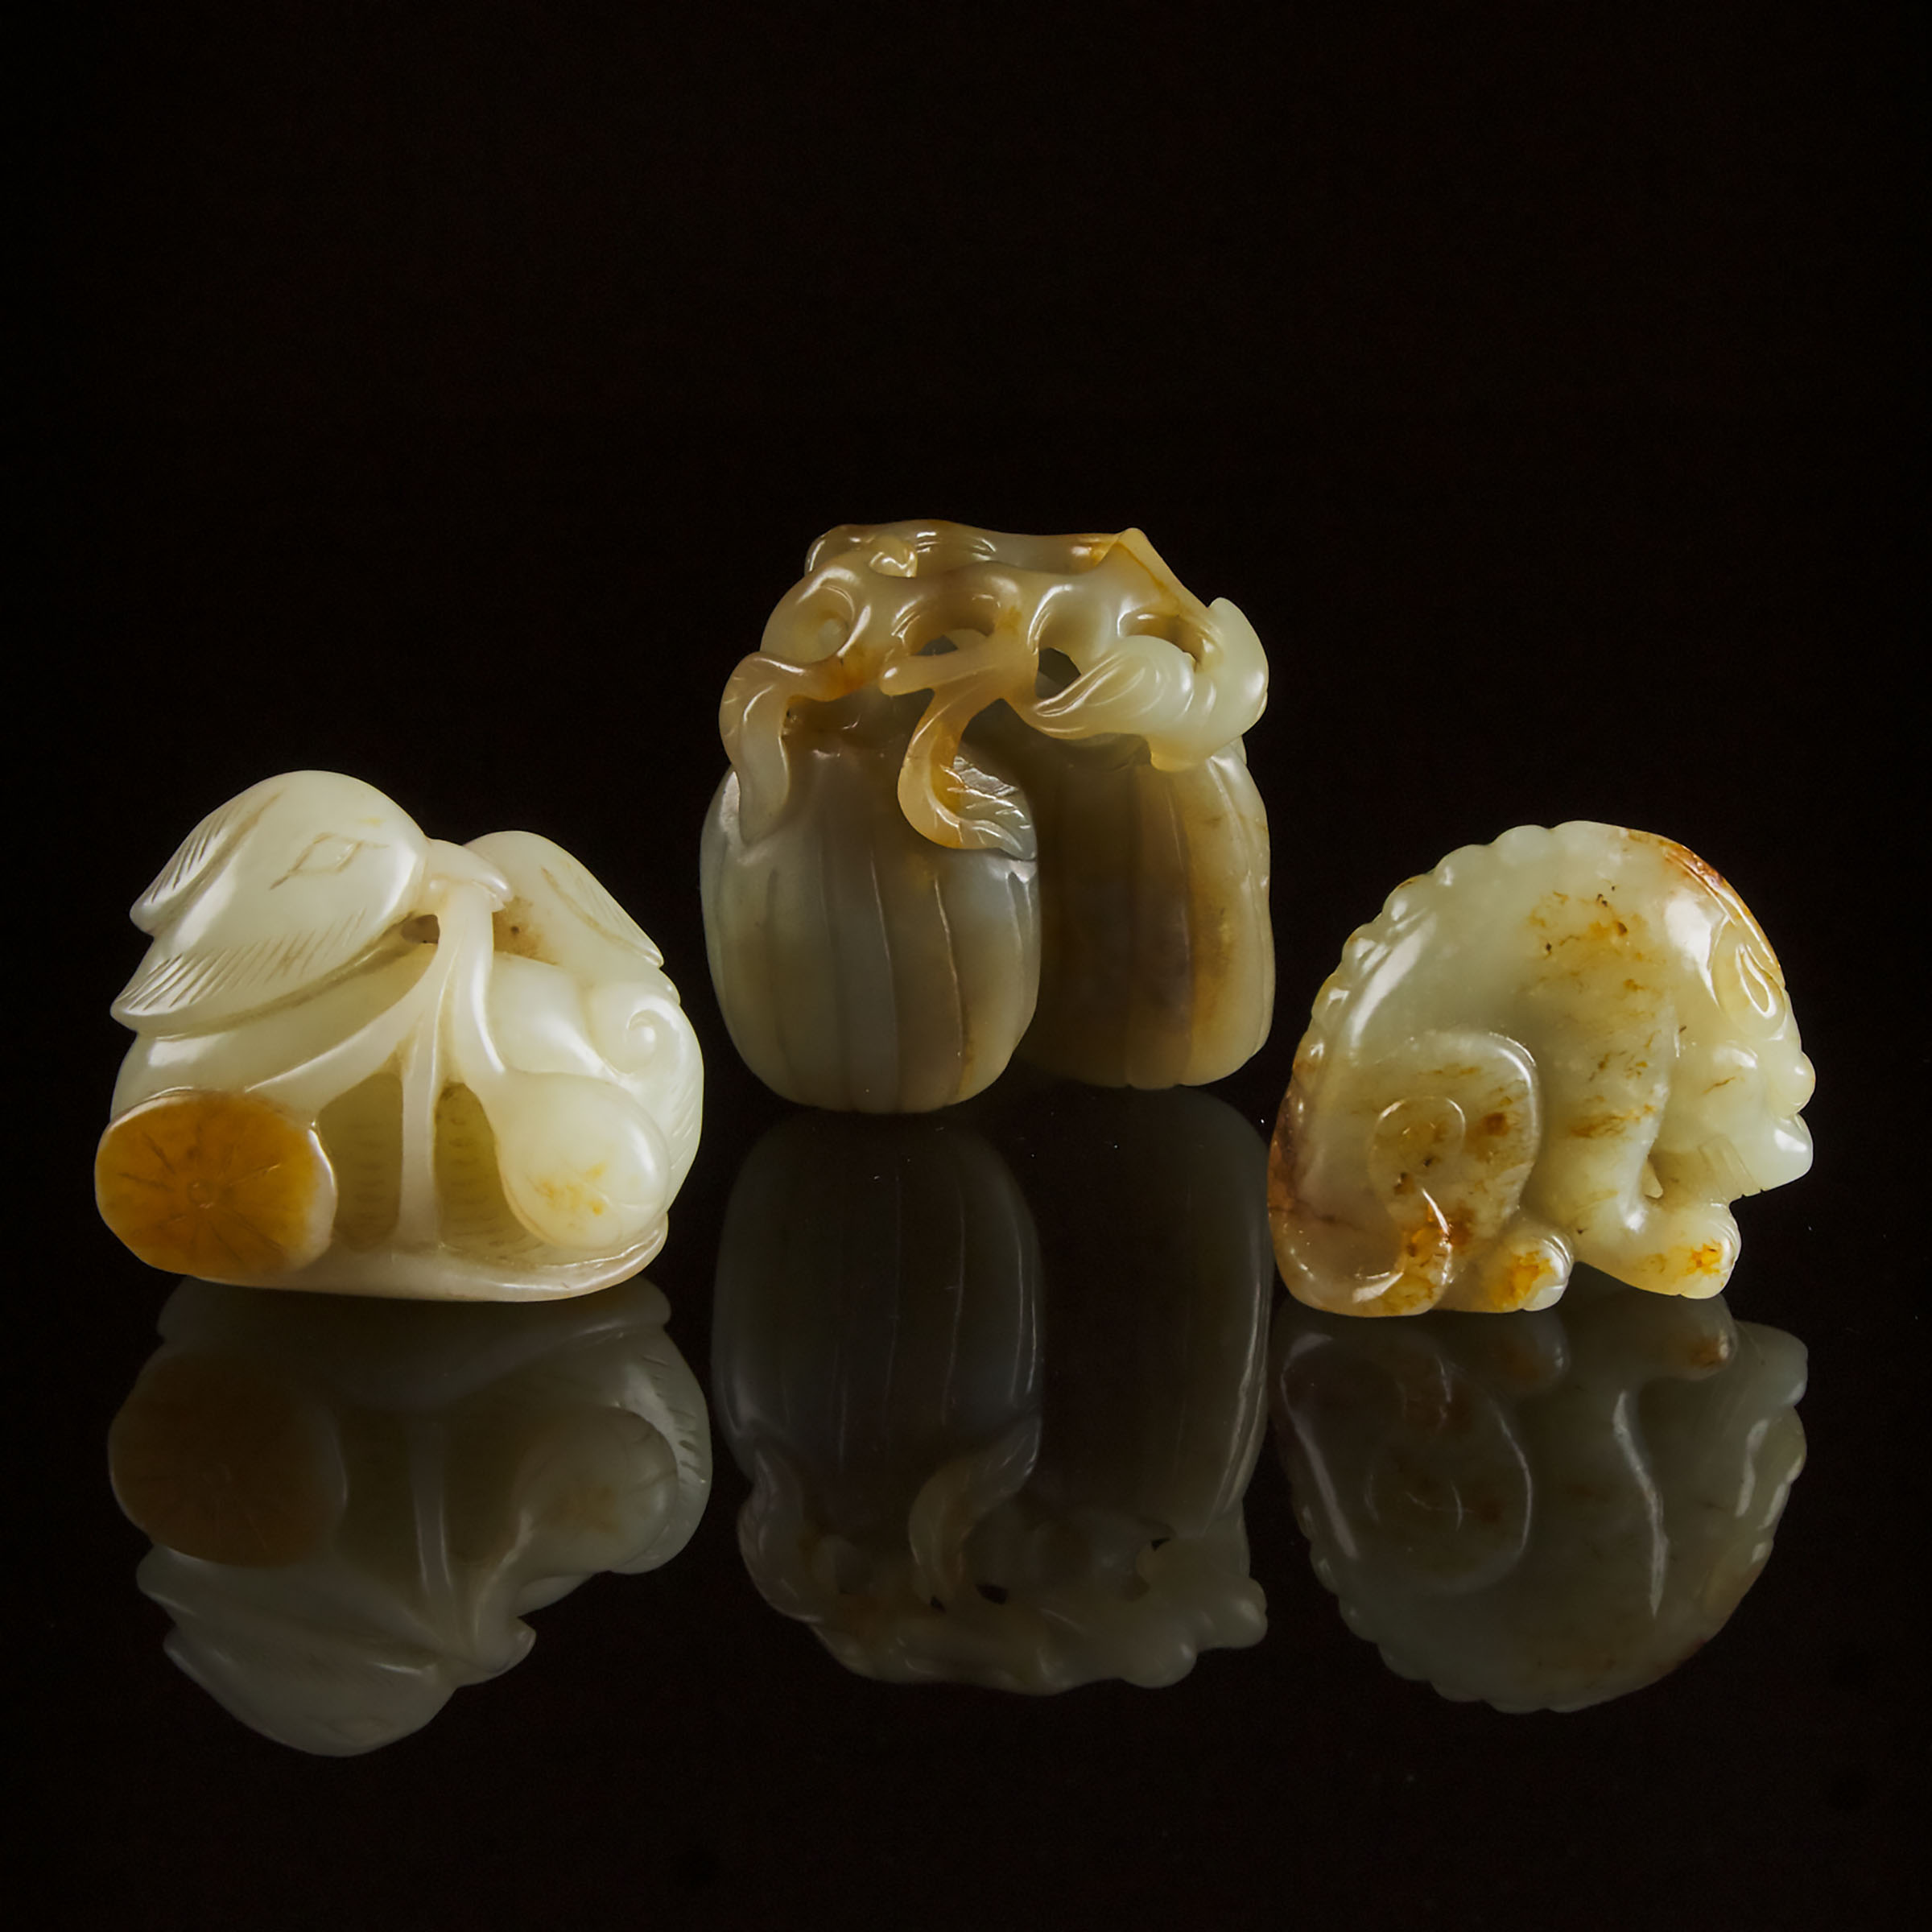 A Group of Three White and Celadon Jade Carvings